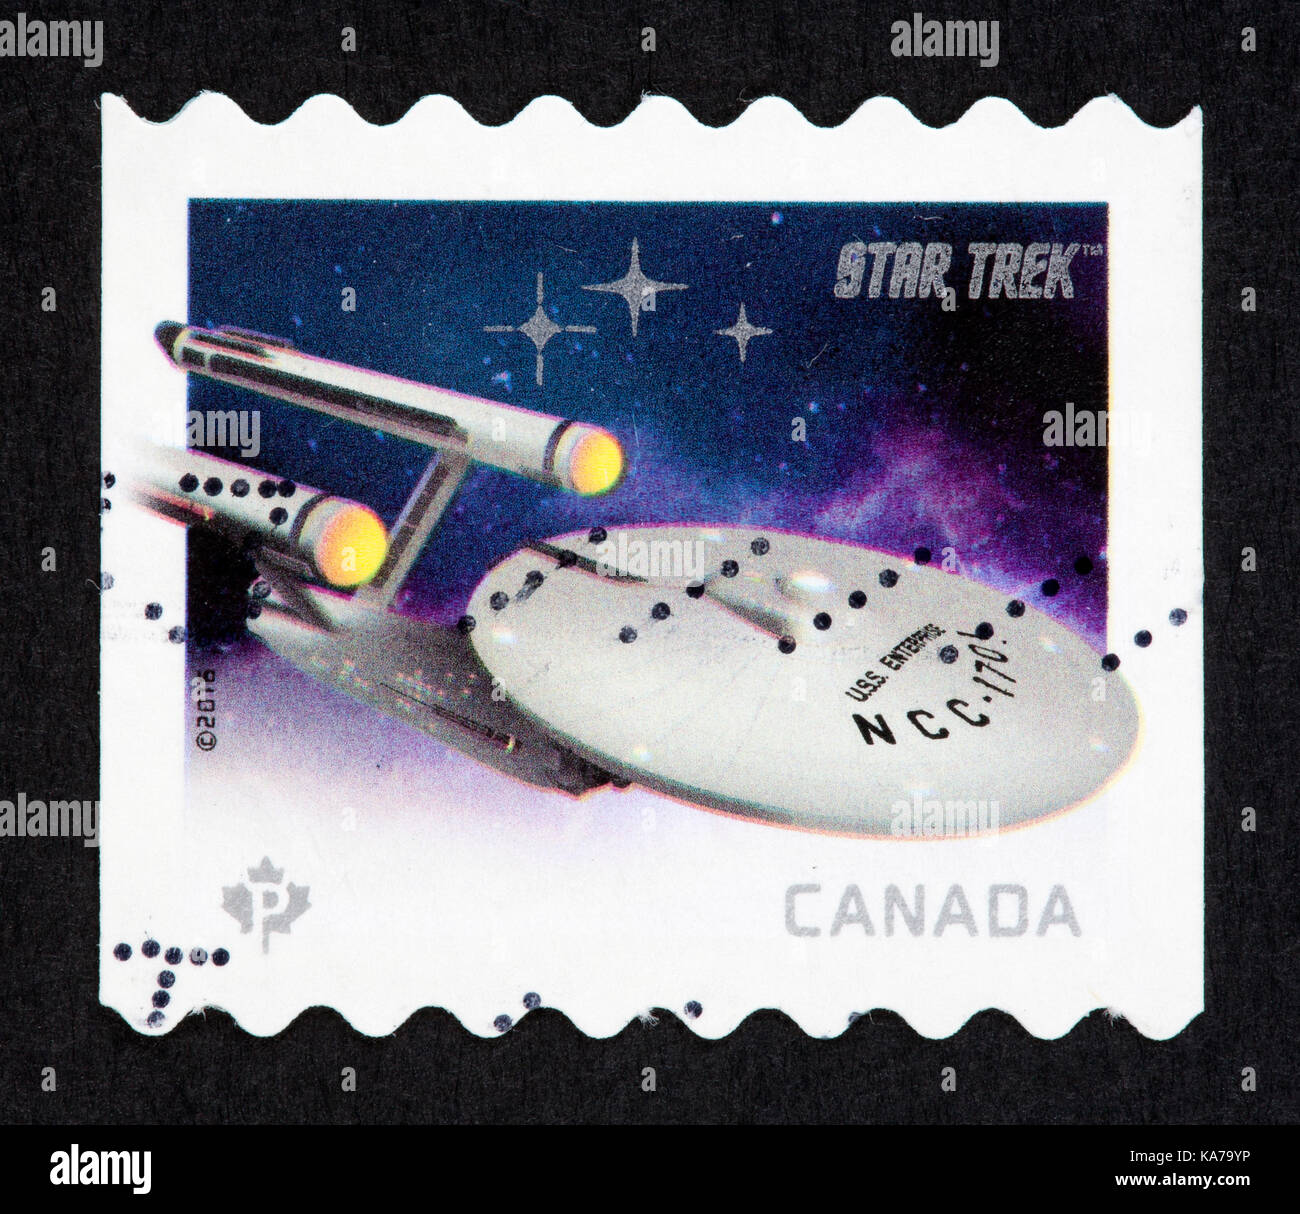 Canadian postage stamp Stock Photo